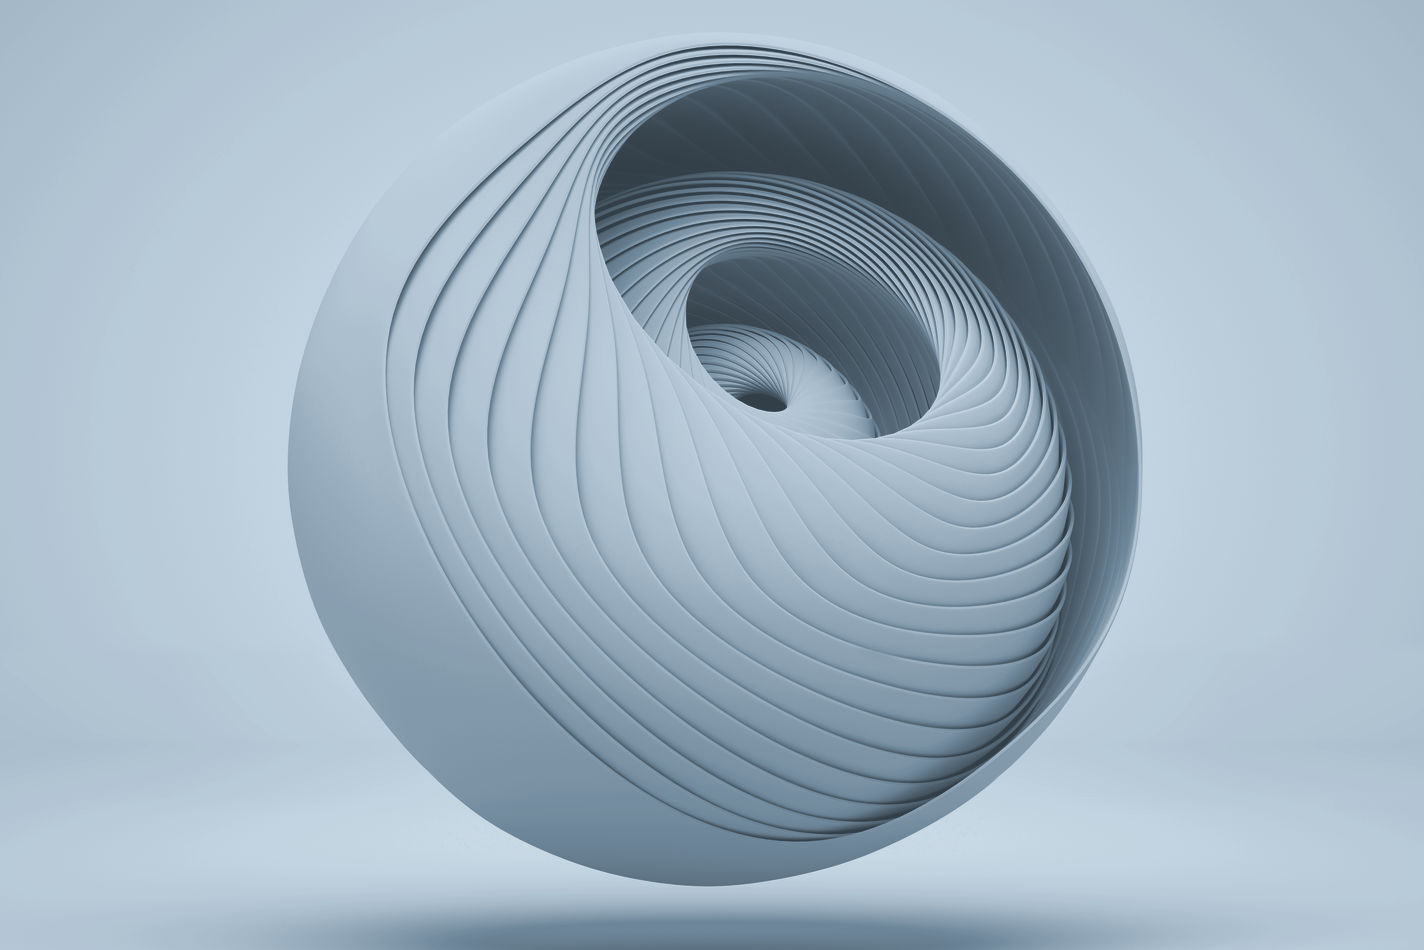 Three dimensional layers curled into a ball